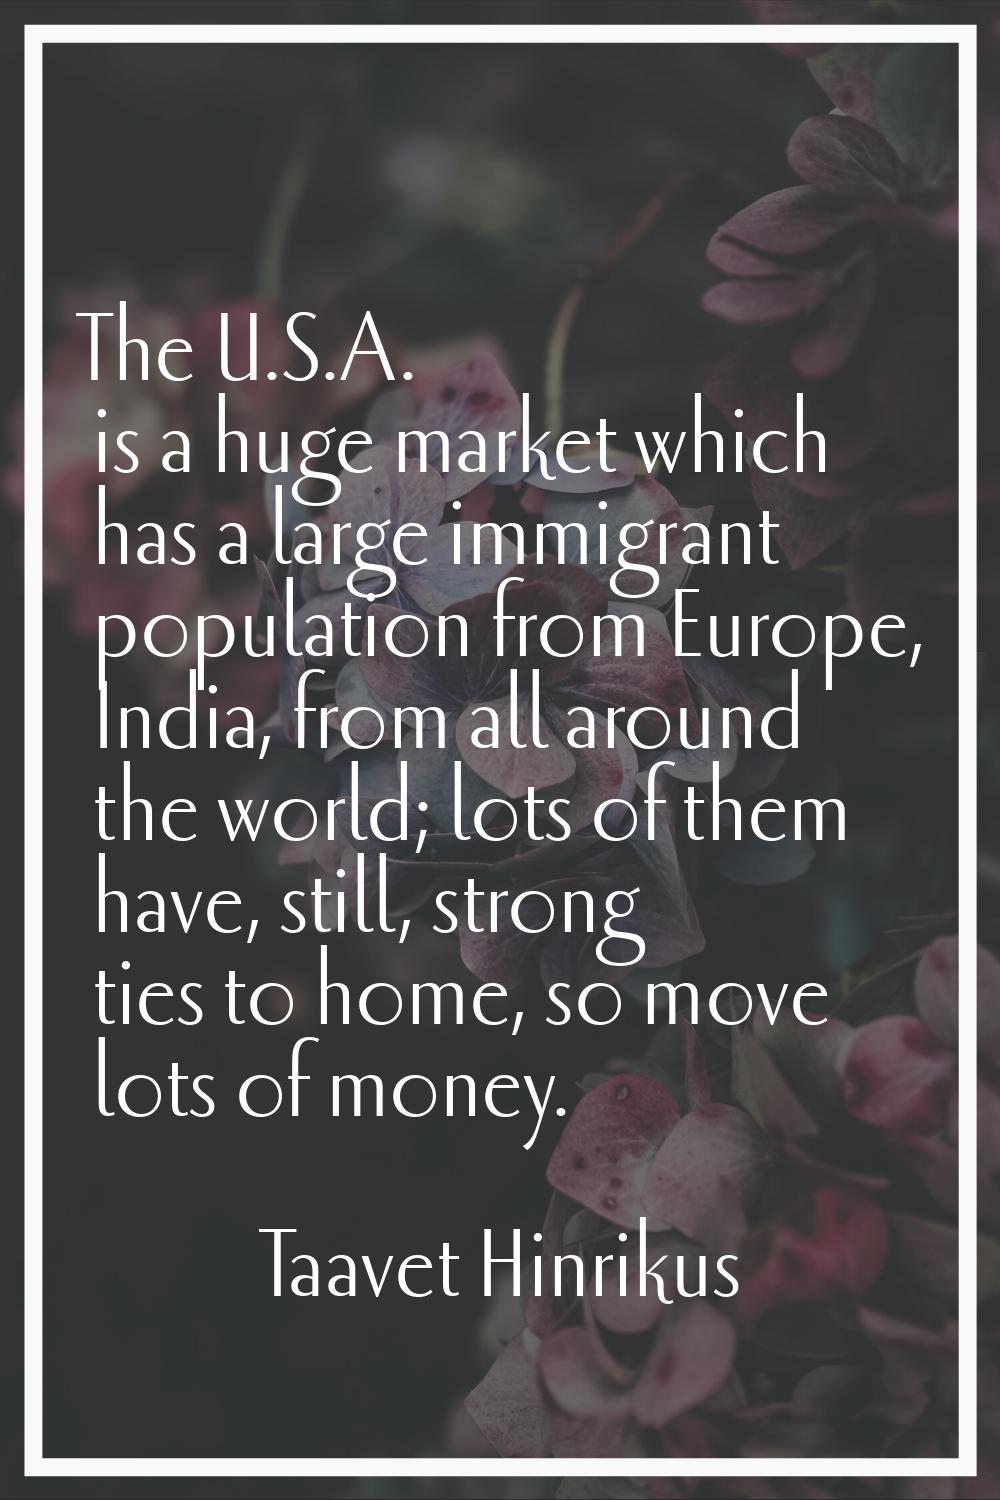 The U.S.A. is a huge market which has a large immigrant population from Europe, India, from all aro